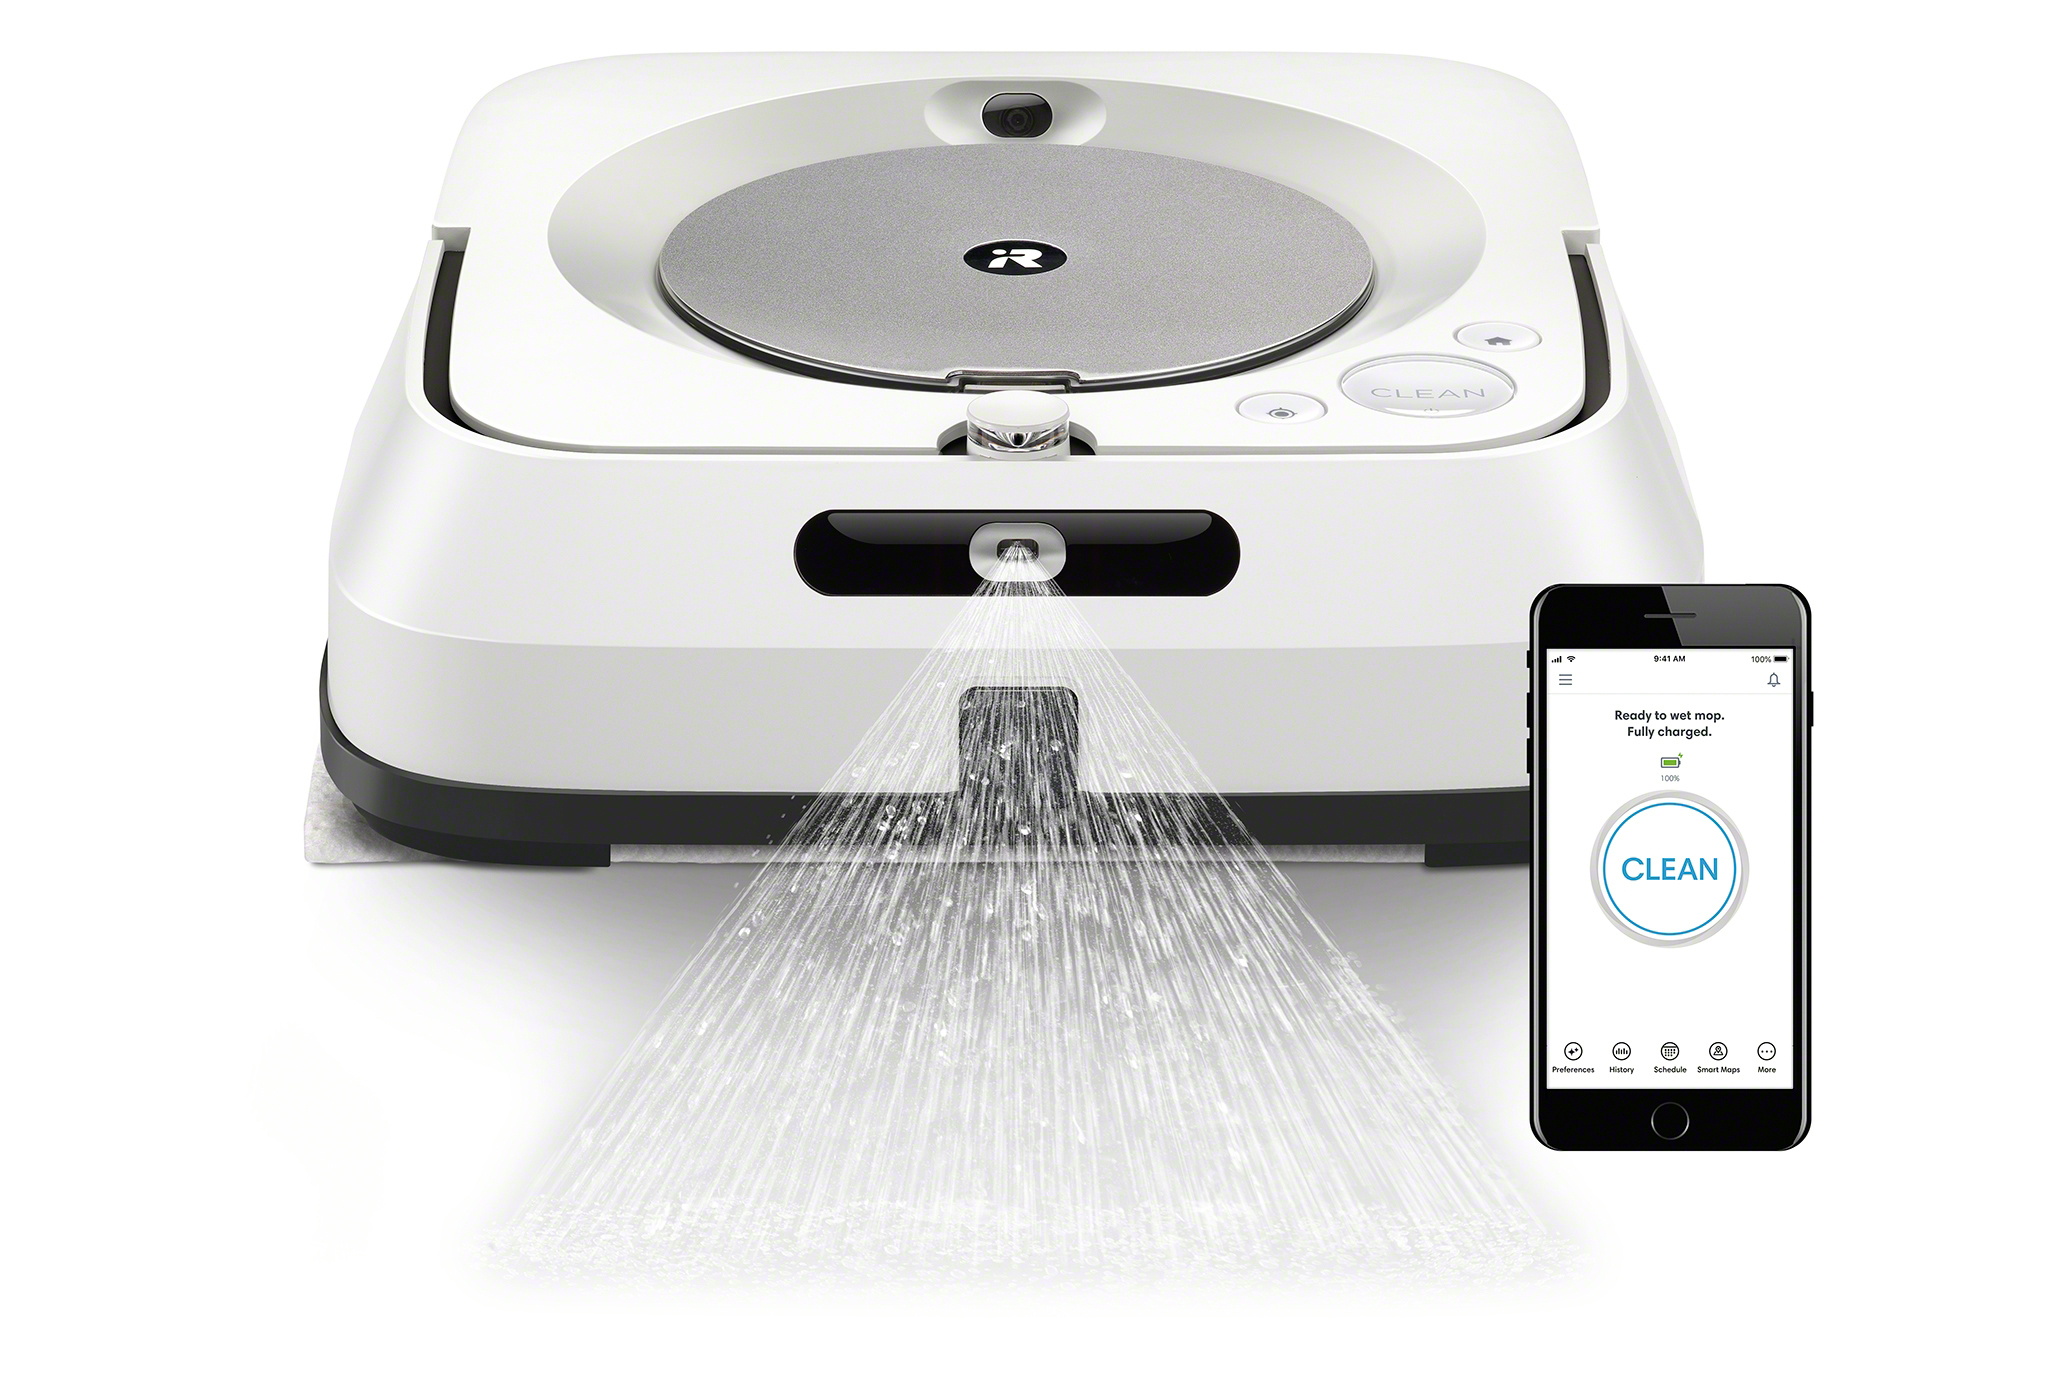 The Braava jet® m6 robot mop is guided by serious smarts. Using iAdapt® 3.0 Navigation with vSLAM® technology and Imprint™ Smart Mapping, the Braava jet® m6 robot mop gets to know the home's floor plan, giving users total control to choose which rooms are cleaned and when.